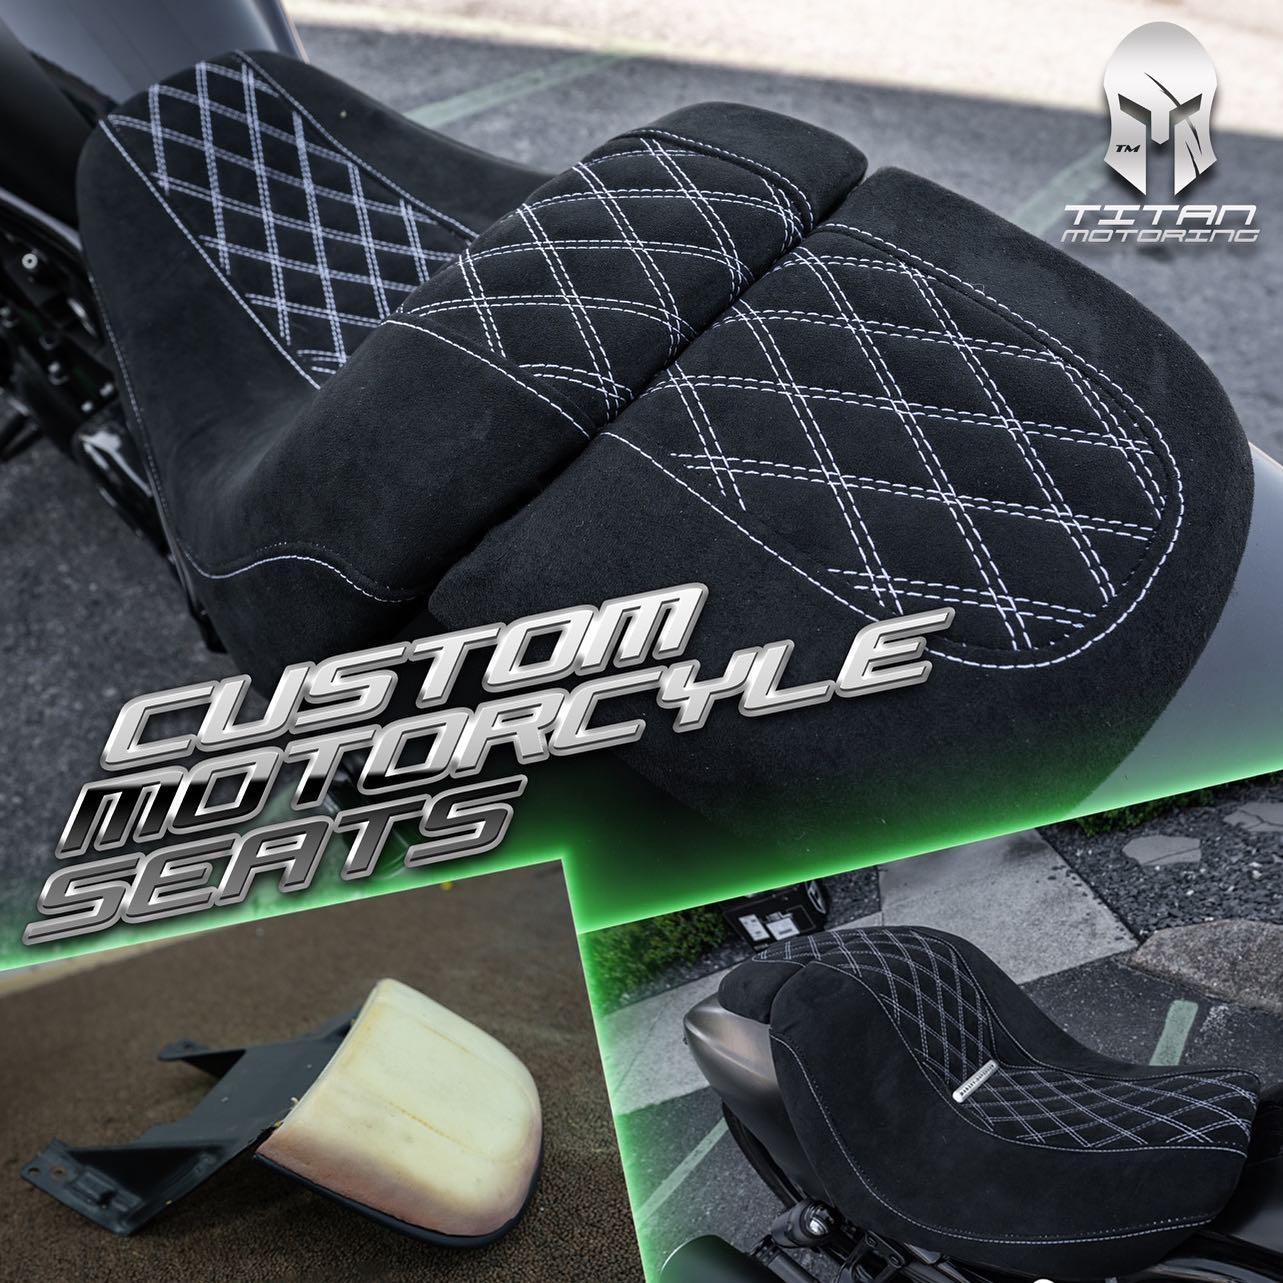 Do you do motorcycle seats? Ya! We do! All in house designed, stitched and formed custom seats for your ride.
.
.
.
.
#motorcycleseats #motorcycle #customseats #harleydavidson #custominterior #fabrication #customshop #titanmotoring #titanmotorcycles 
@dancaraudio